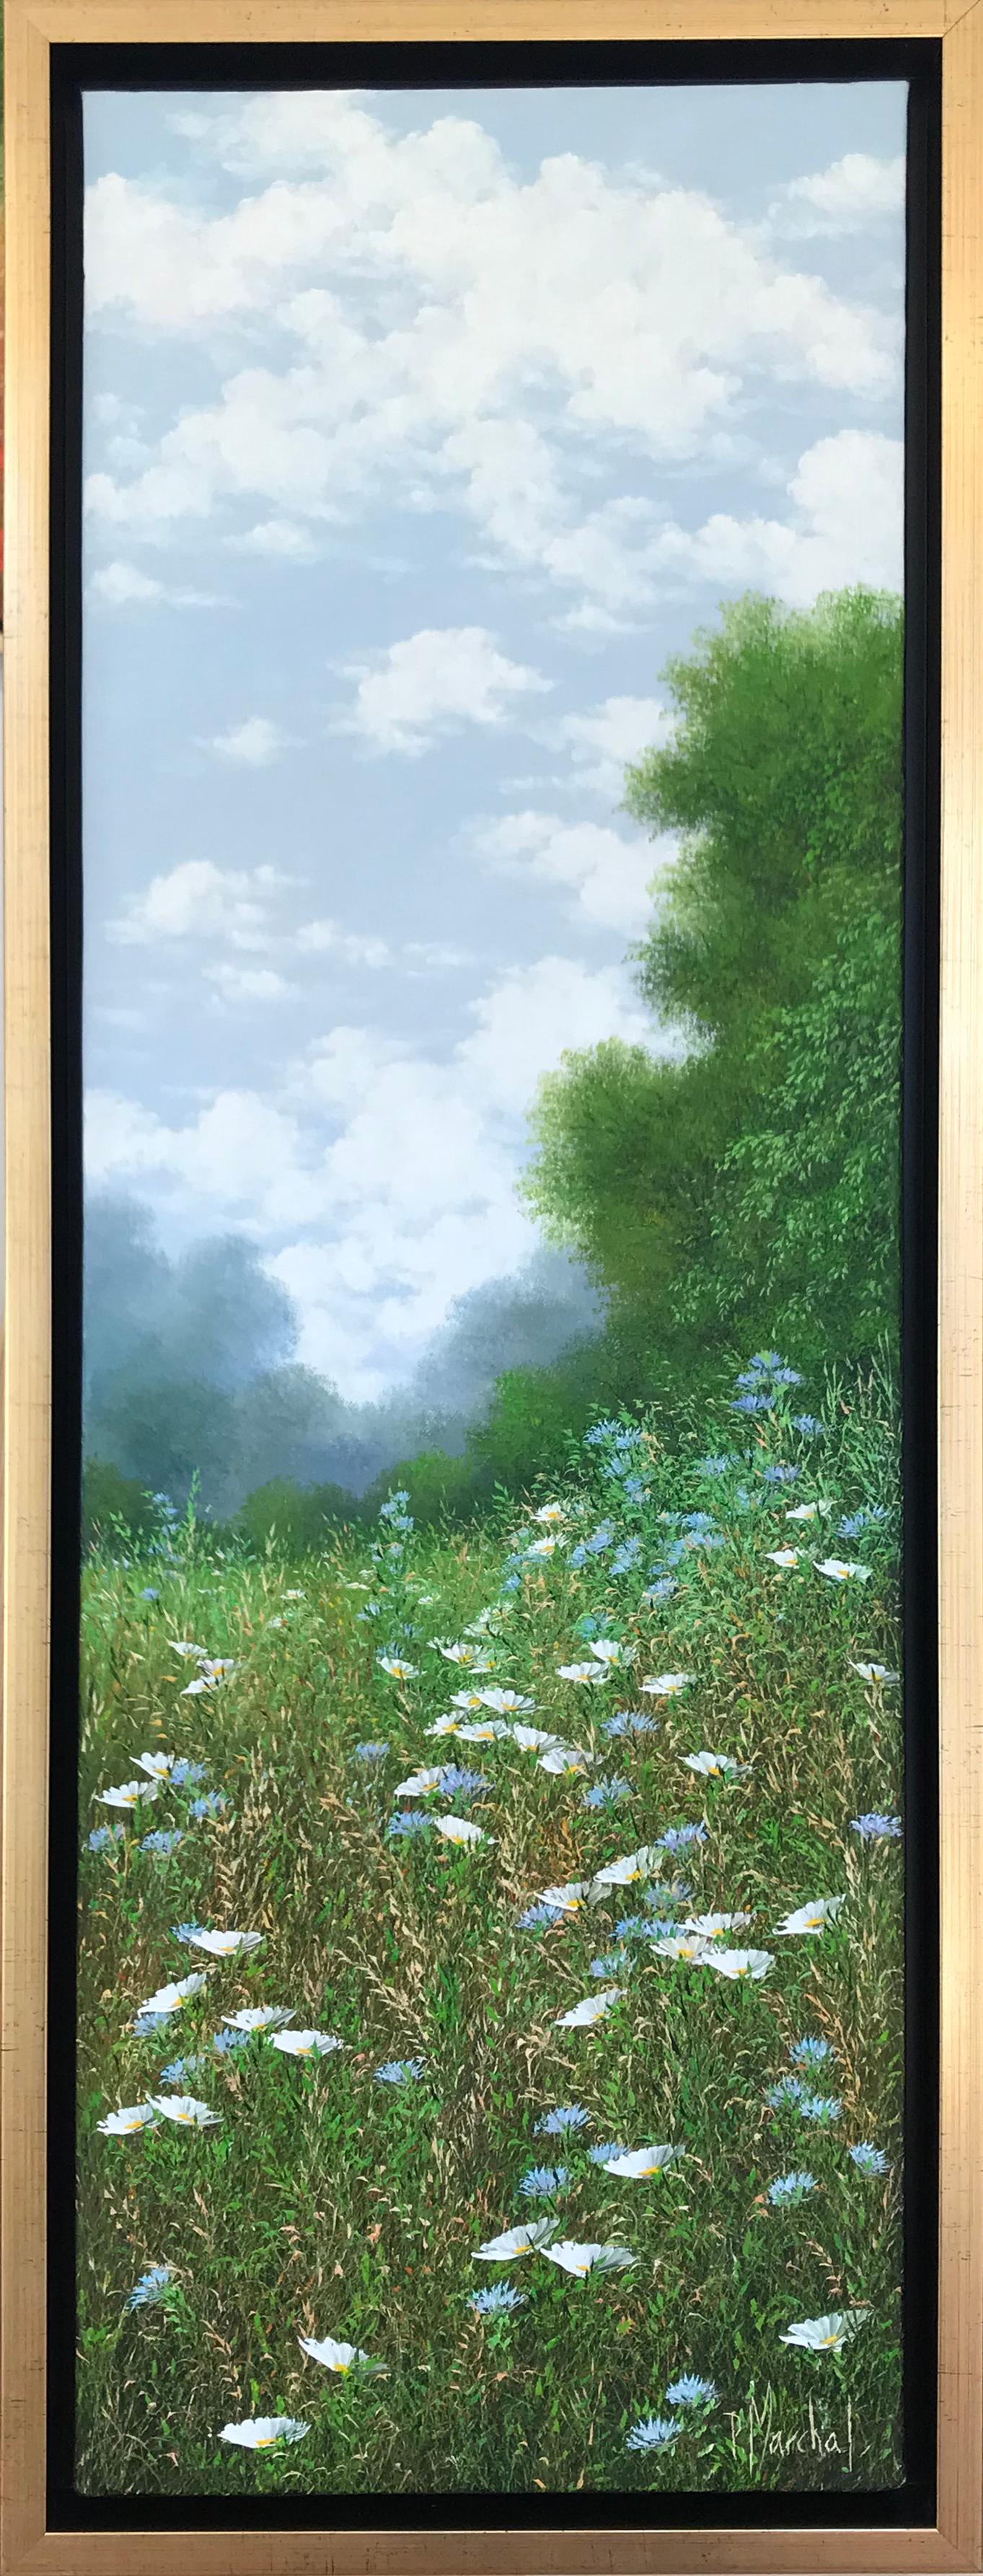 Bleuets et Marguerites, oil paiting on canvas, size with frame 95.4 x 35.4 cm - Painting by Patrice Marchal